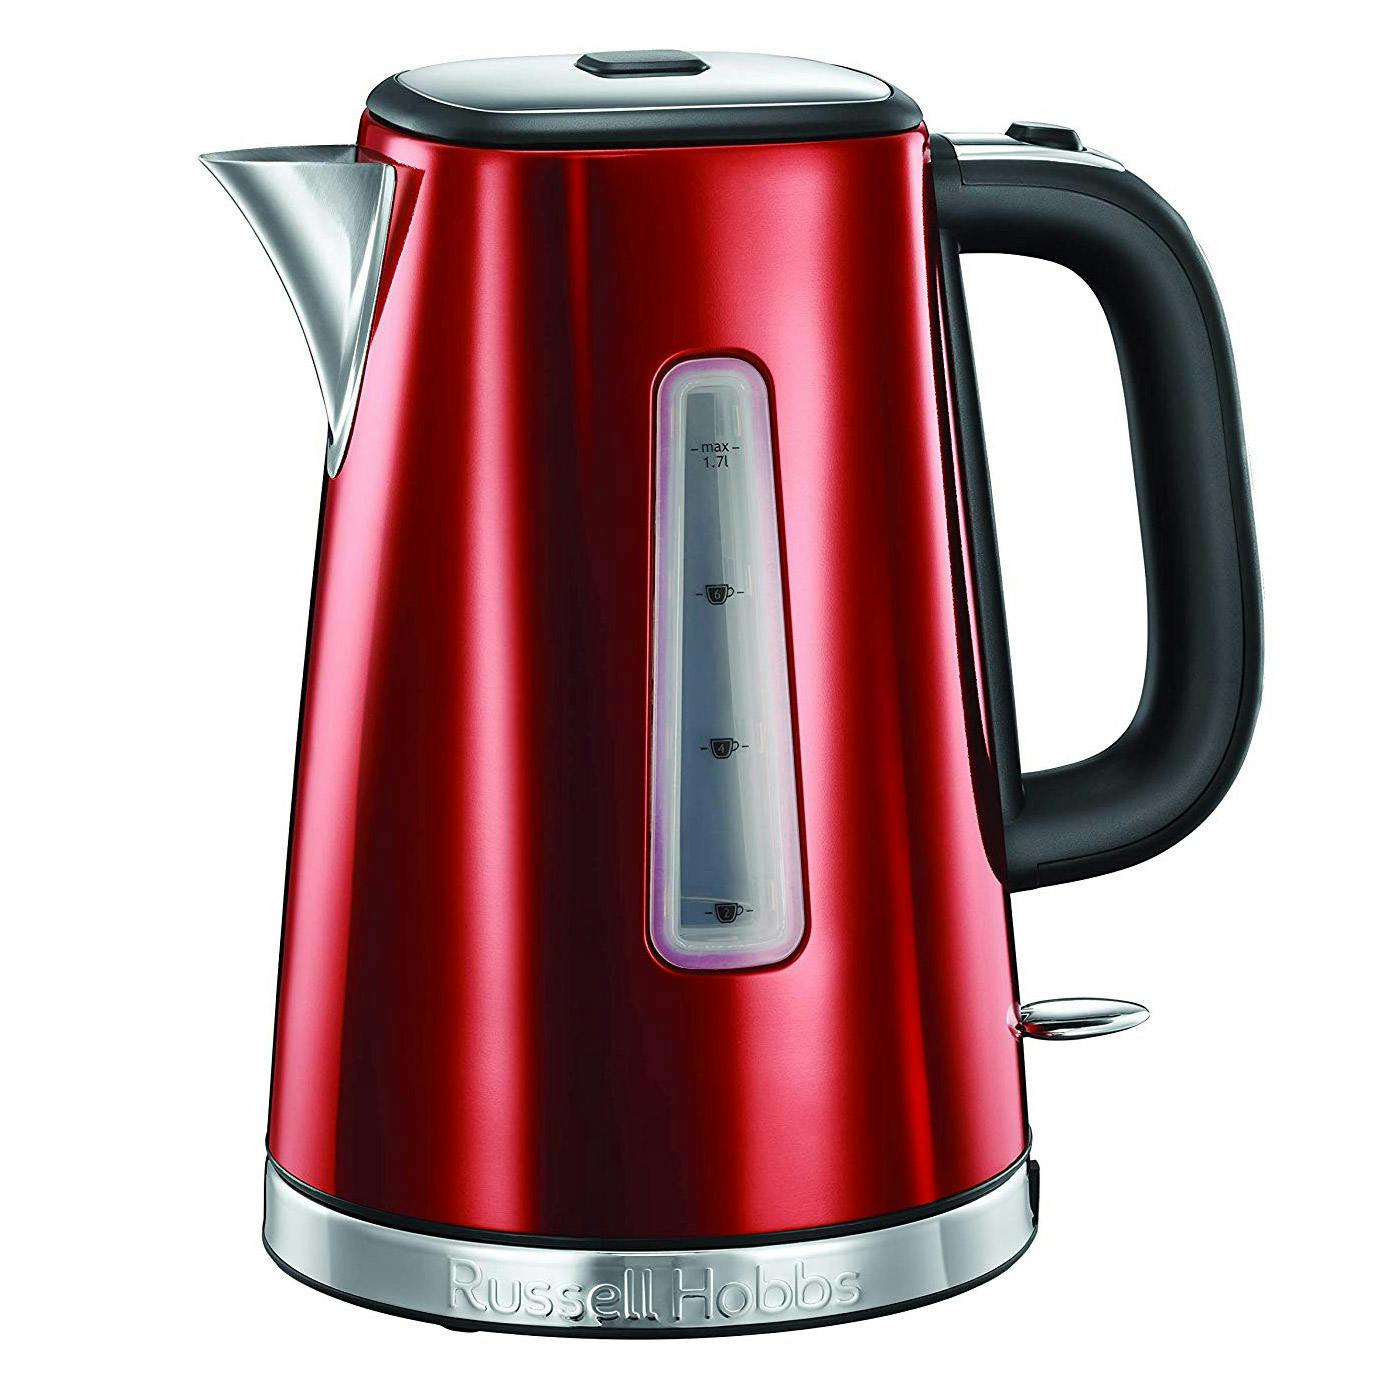 Delonghi Red Kettle Cheapest Clearance, Save 45% | jlcatj.gob.mx